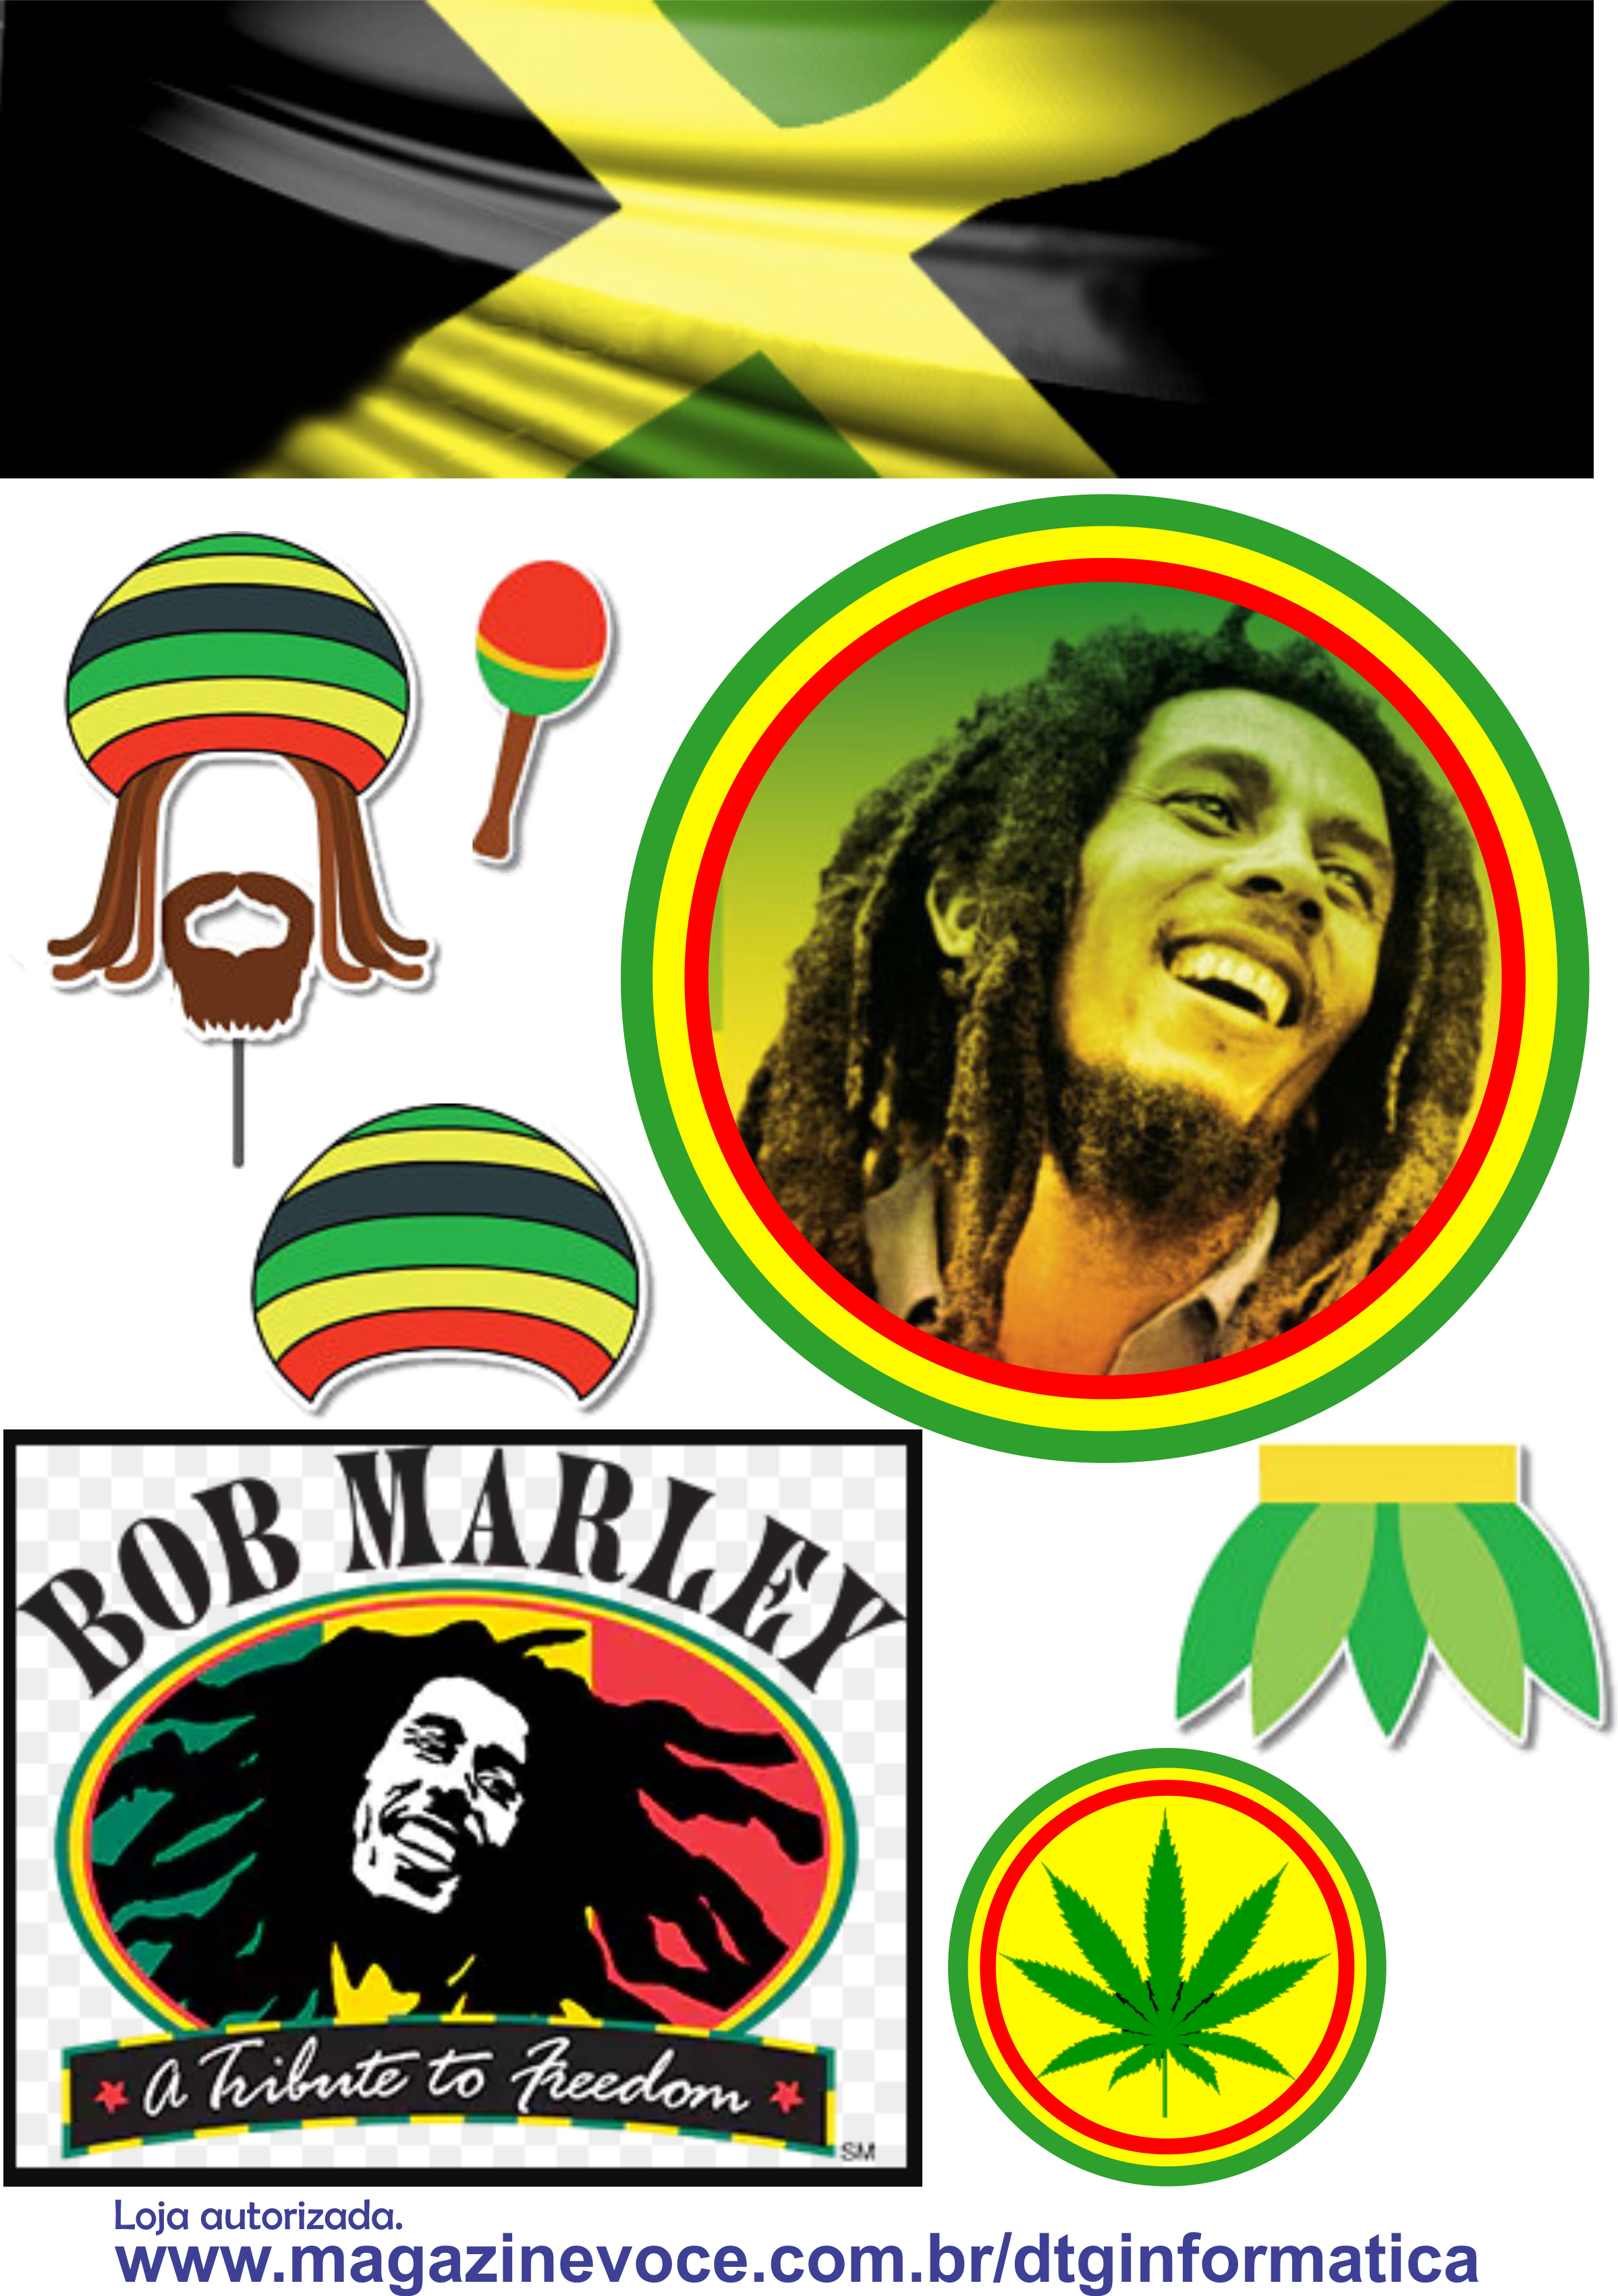 Bob Marley Tribute Collage